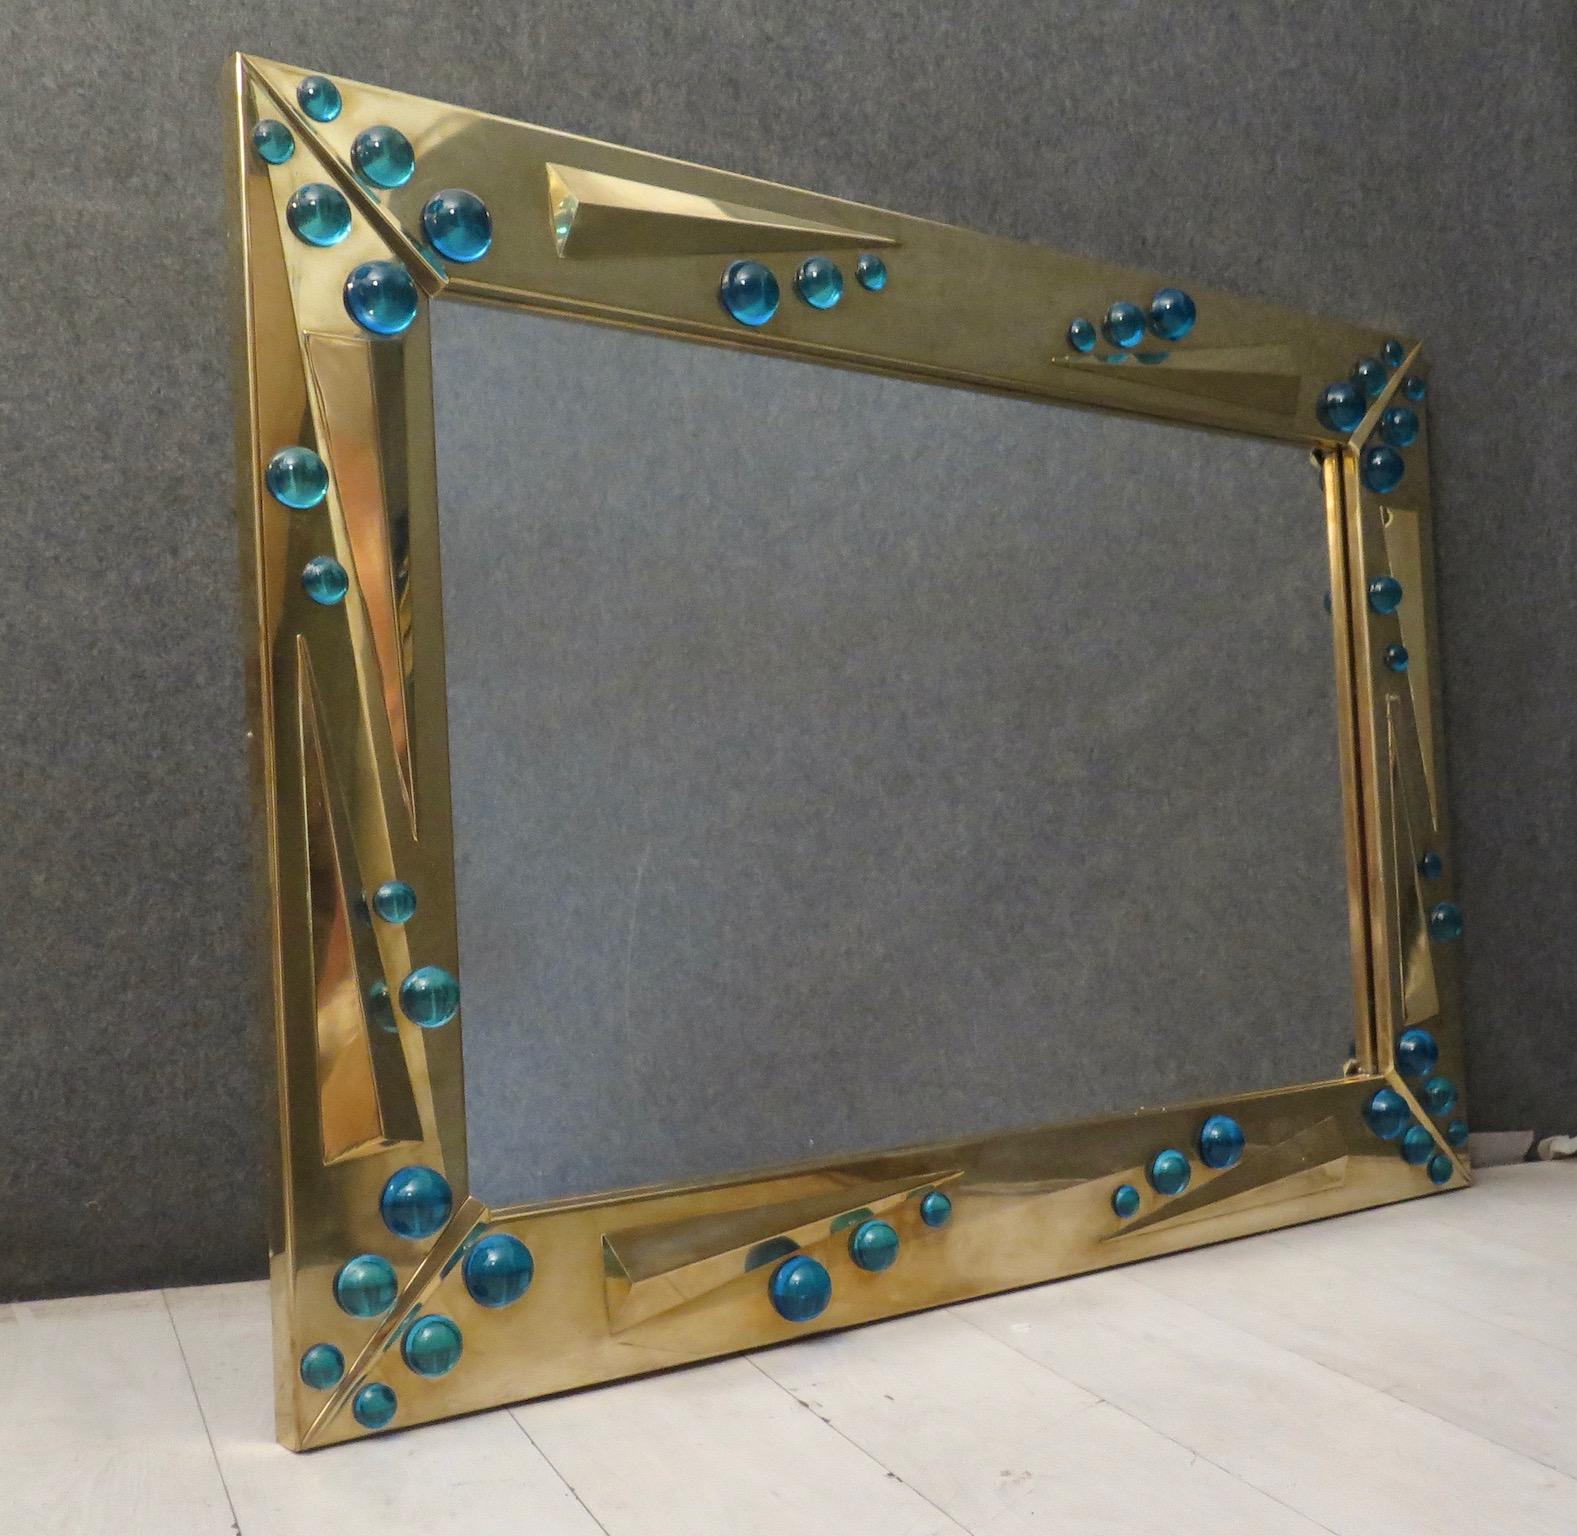 Very special Murano glass mirror from the middle of the century, exalting for its color and design.

All brass frame, with brass and glass inserts. On the frame all in brass there are some big lenses in Murano glass, in blue color. The mirror can be